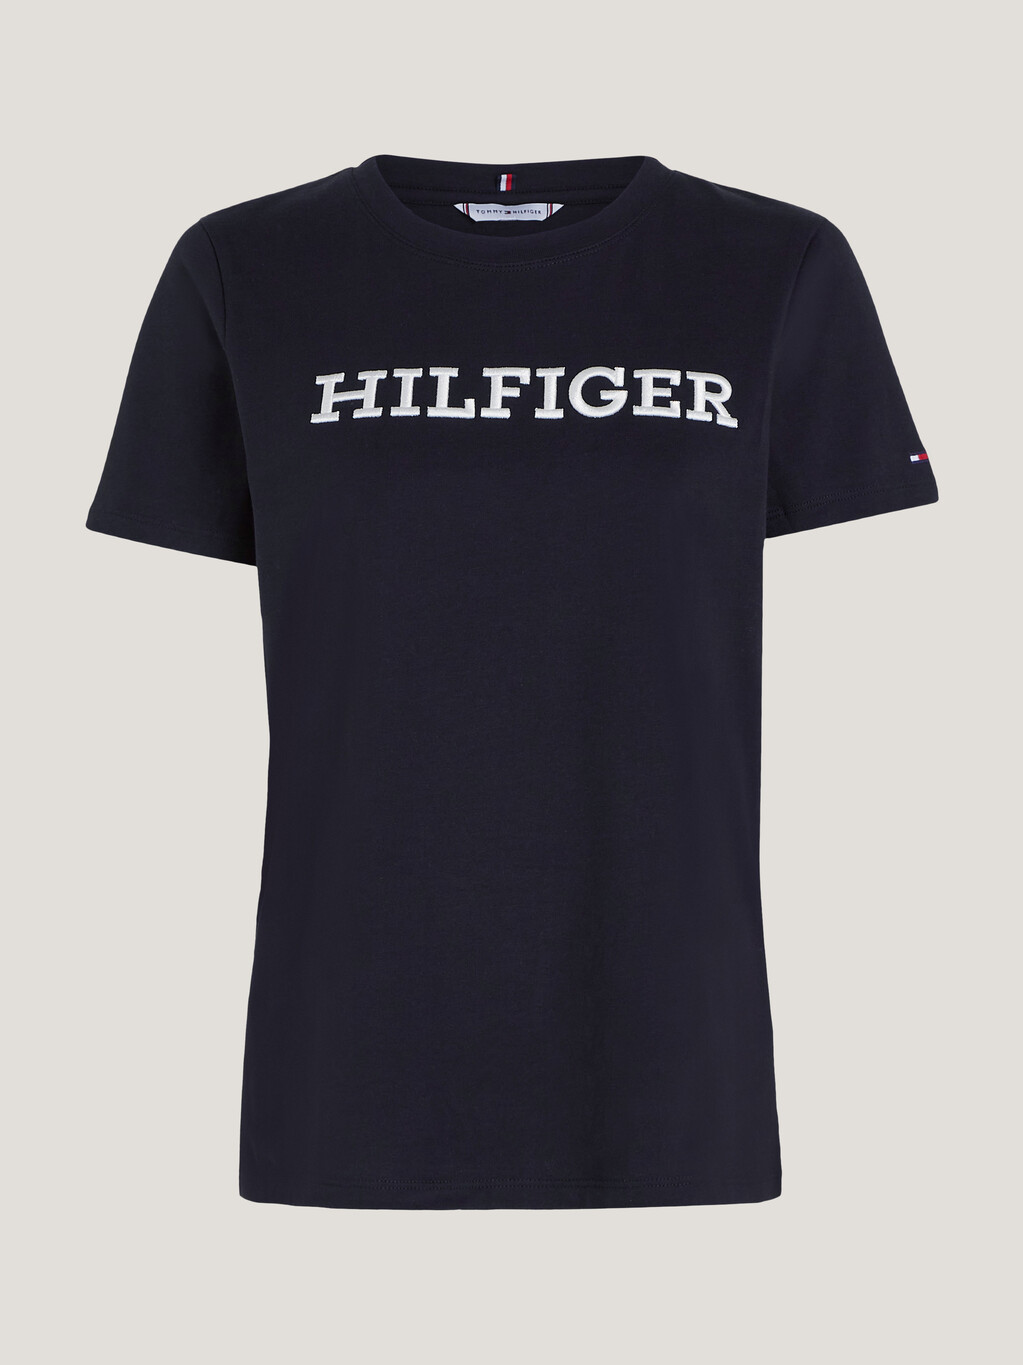 Logo Embroidery Jersey T-Shirt, Black, hi-res